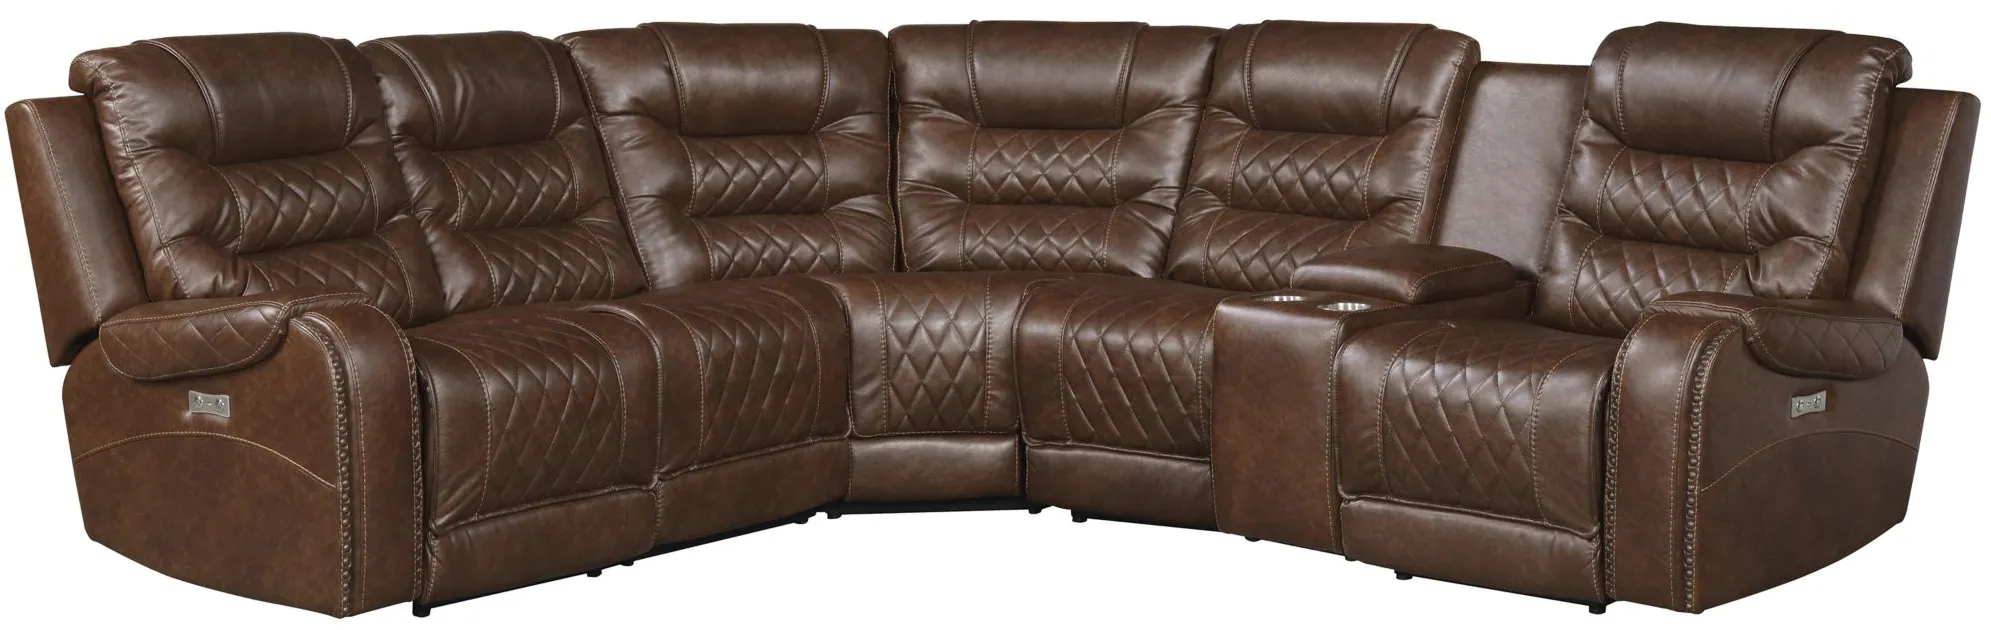 Greenway 6-pc. Modular Power Reclining Sectional Sofa in Brown by Homelegance